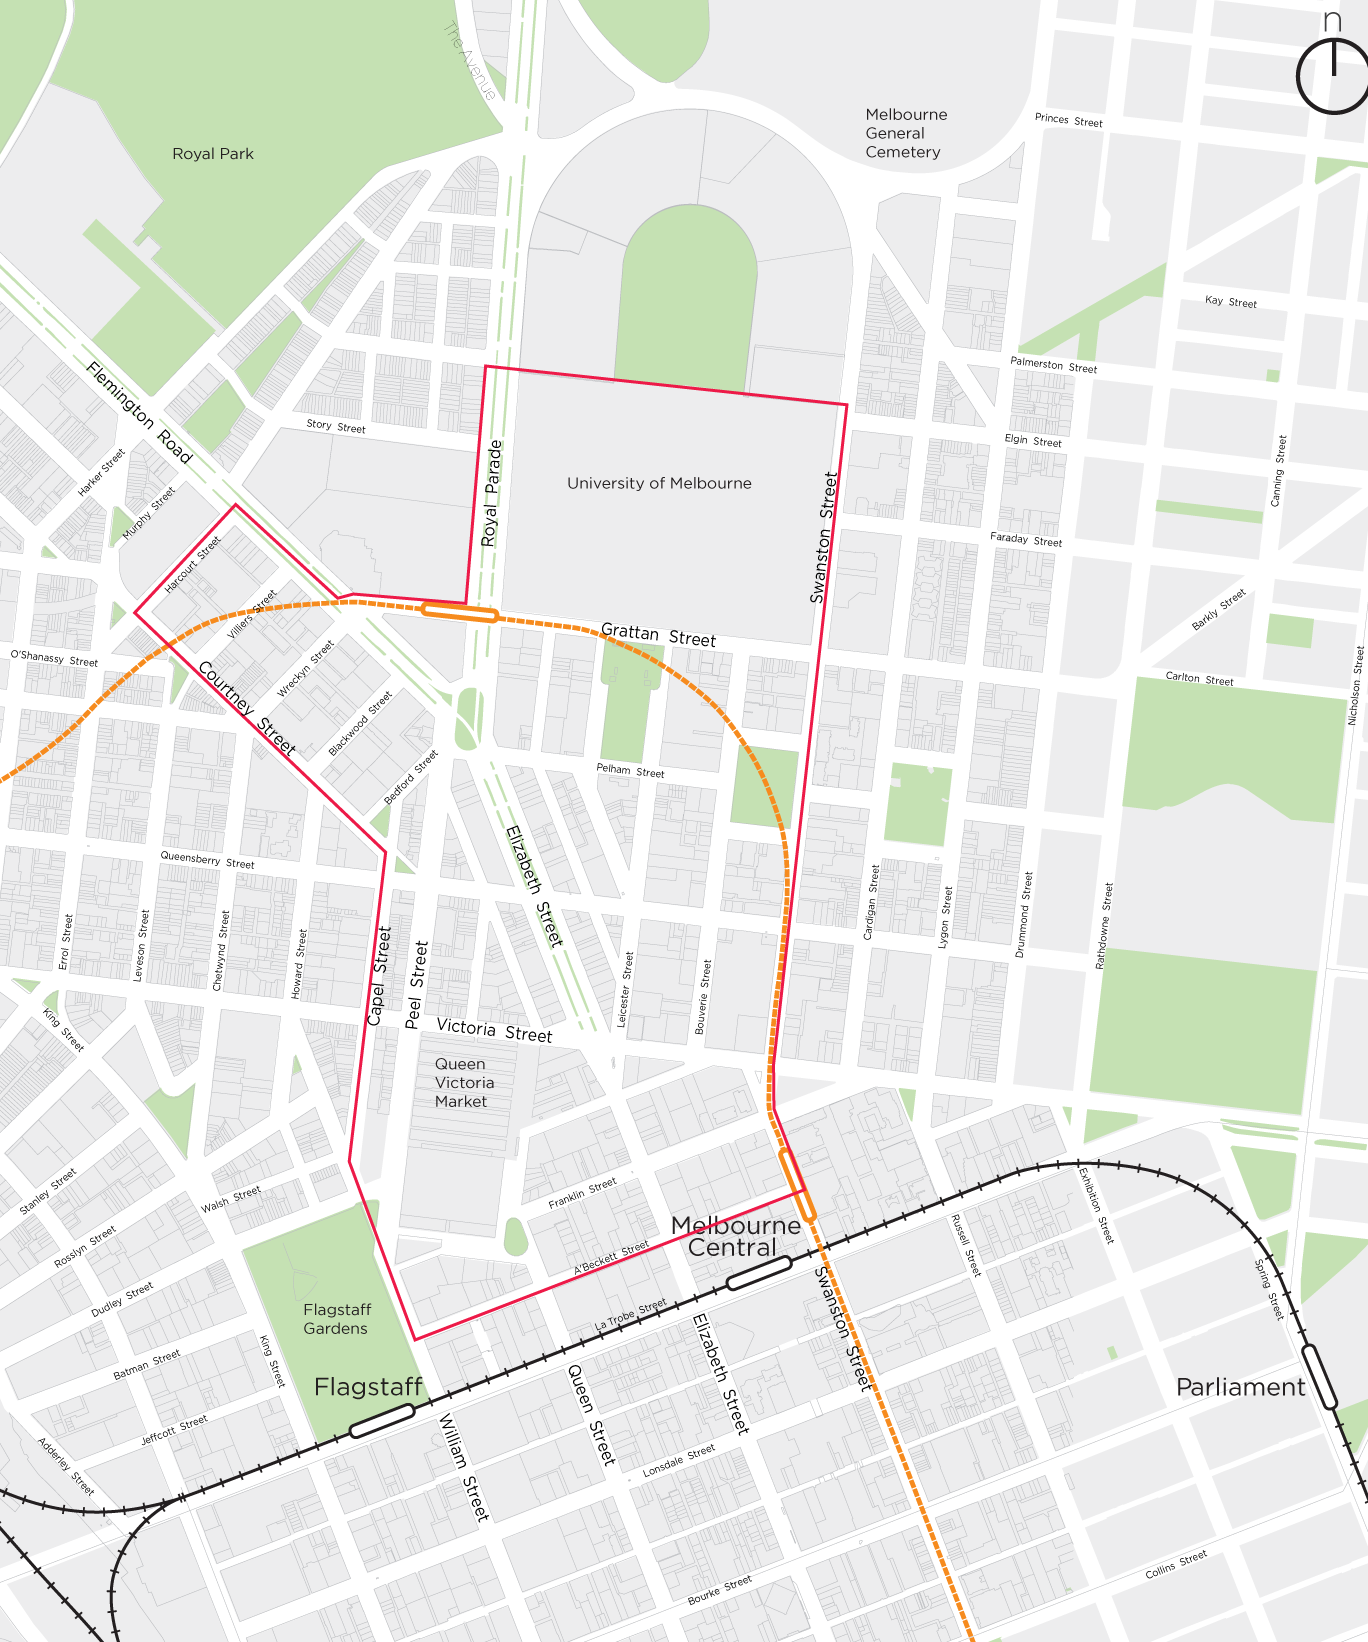 City North covers an area of 130 hectares to the north of the central city, taking in Grattan, Swanston, Victoria, Peel, Capel, Courtney and Harcourt Streets.